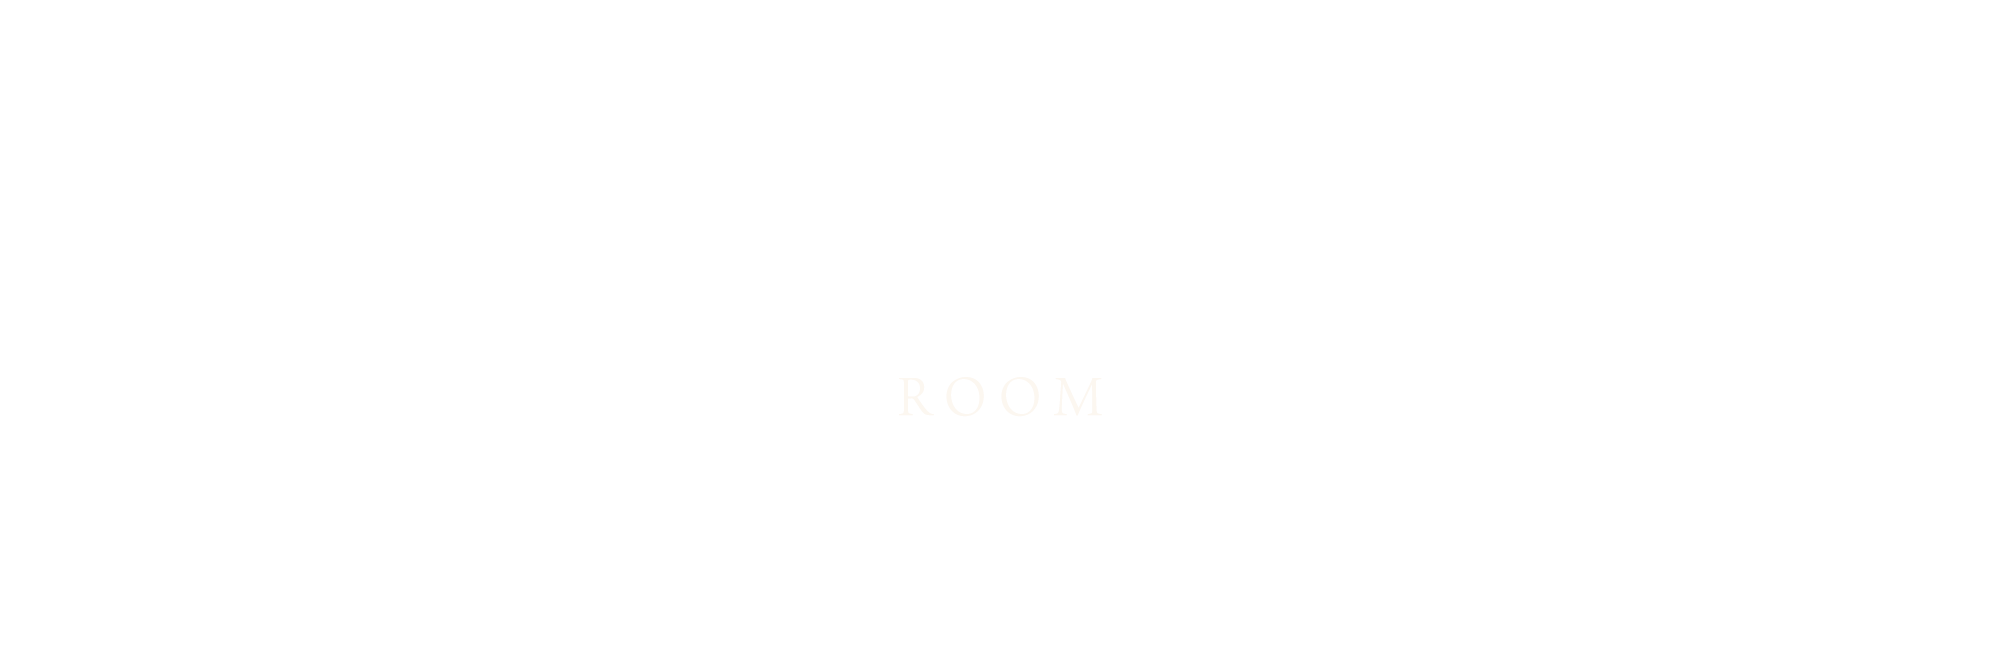 Time’s One ROOM